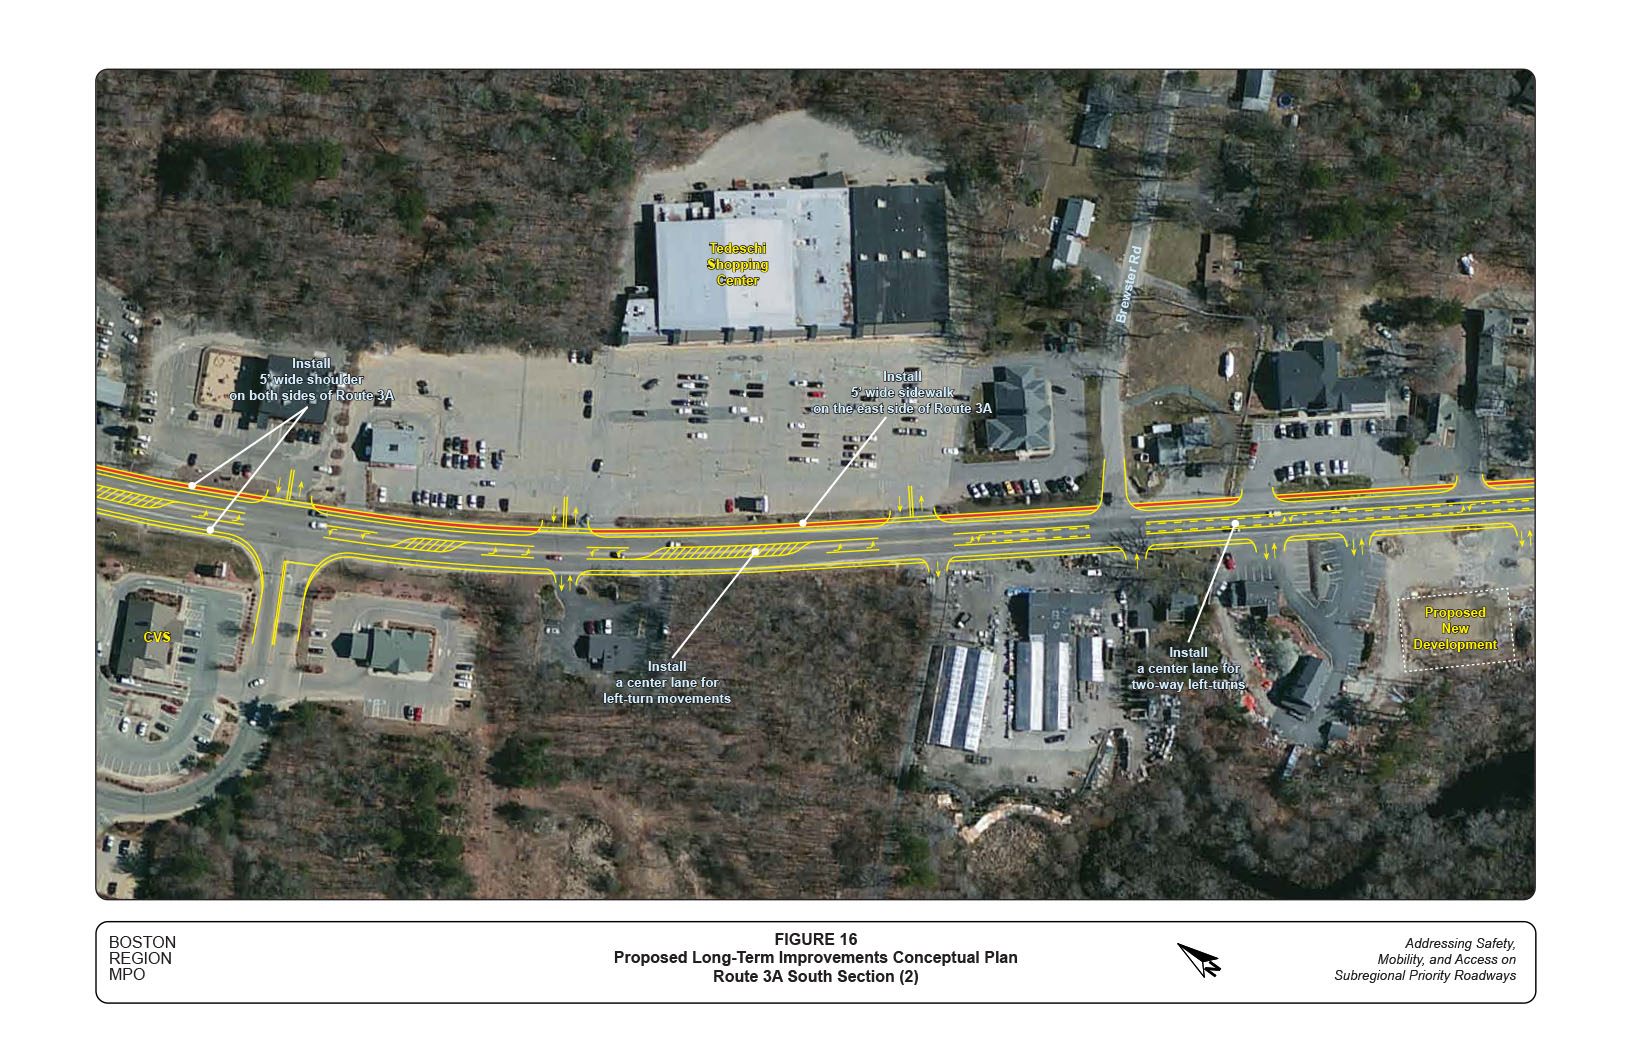 Figure 16 is an aerial view map that depicts further proposed long-term improvements (conceptual plan) for the south section of Route 3A.